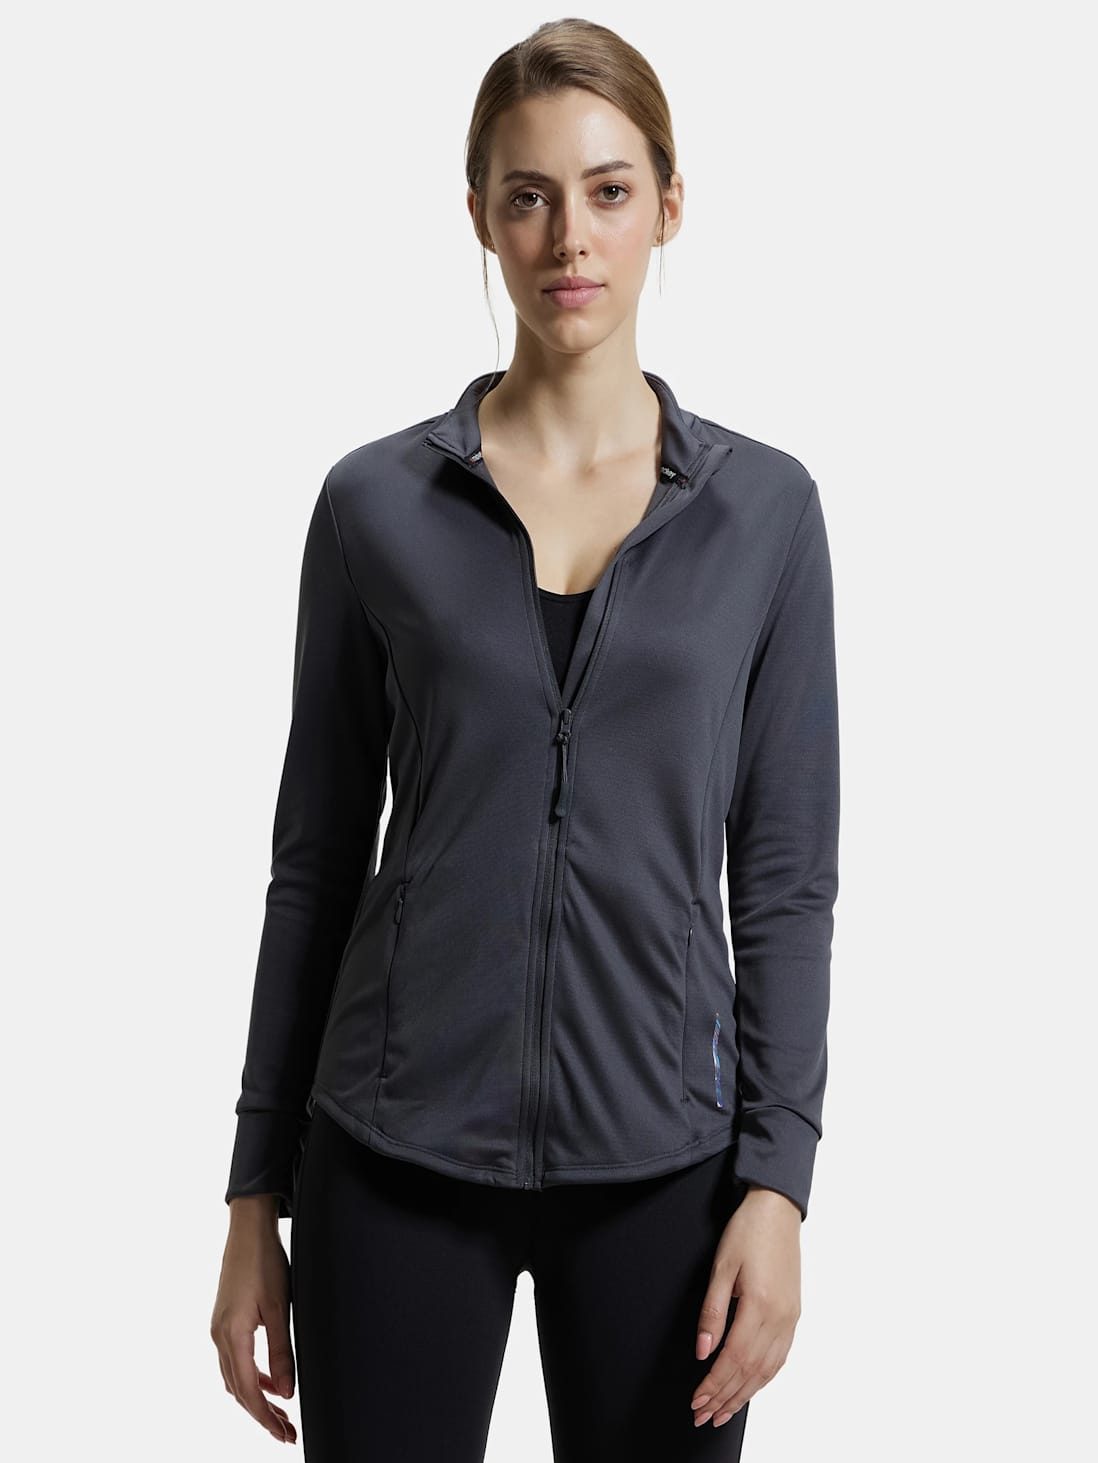 Buy Women's Microfiber Relaxed fit Jacket with Curved Back Hem and StayDry  Treatment - Forged Iron MW67